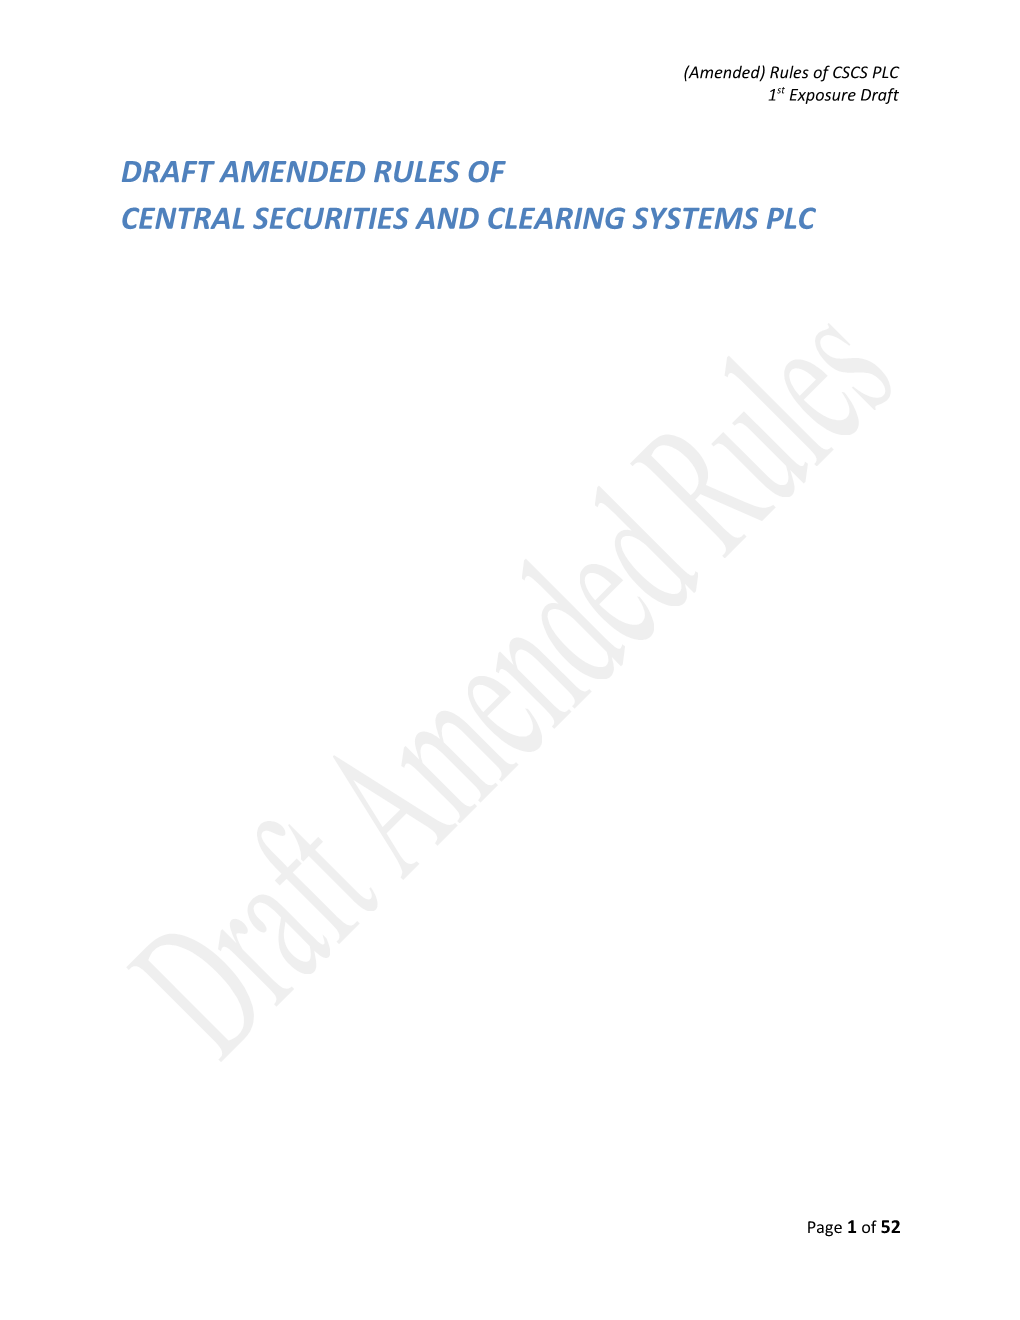 Central Securities and Clearing Systems Plc